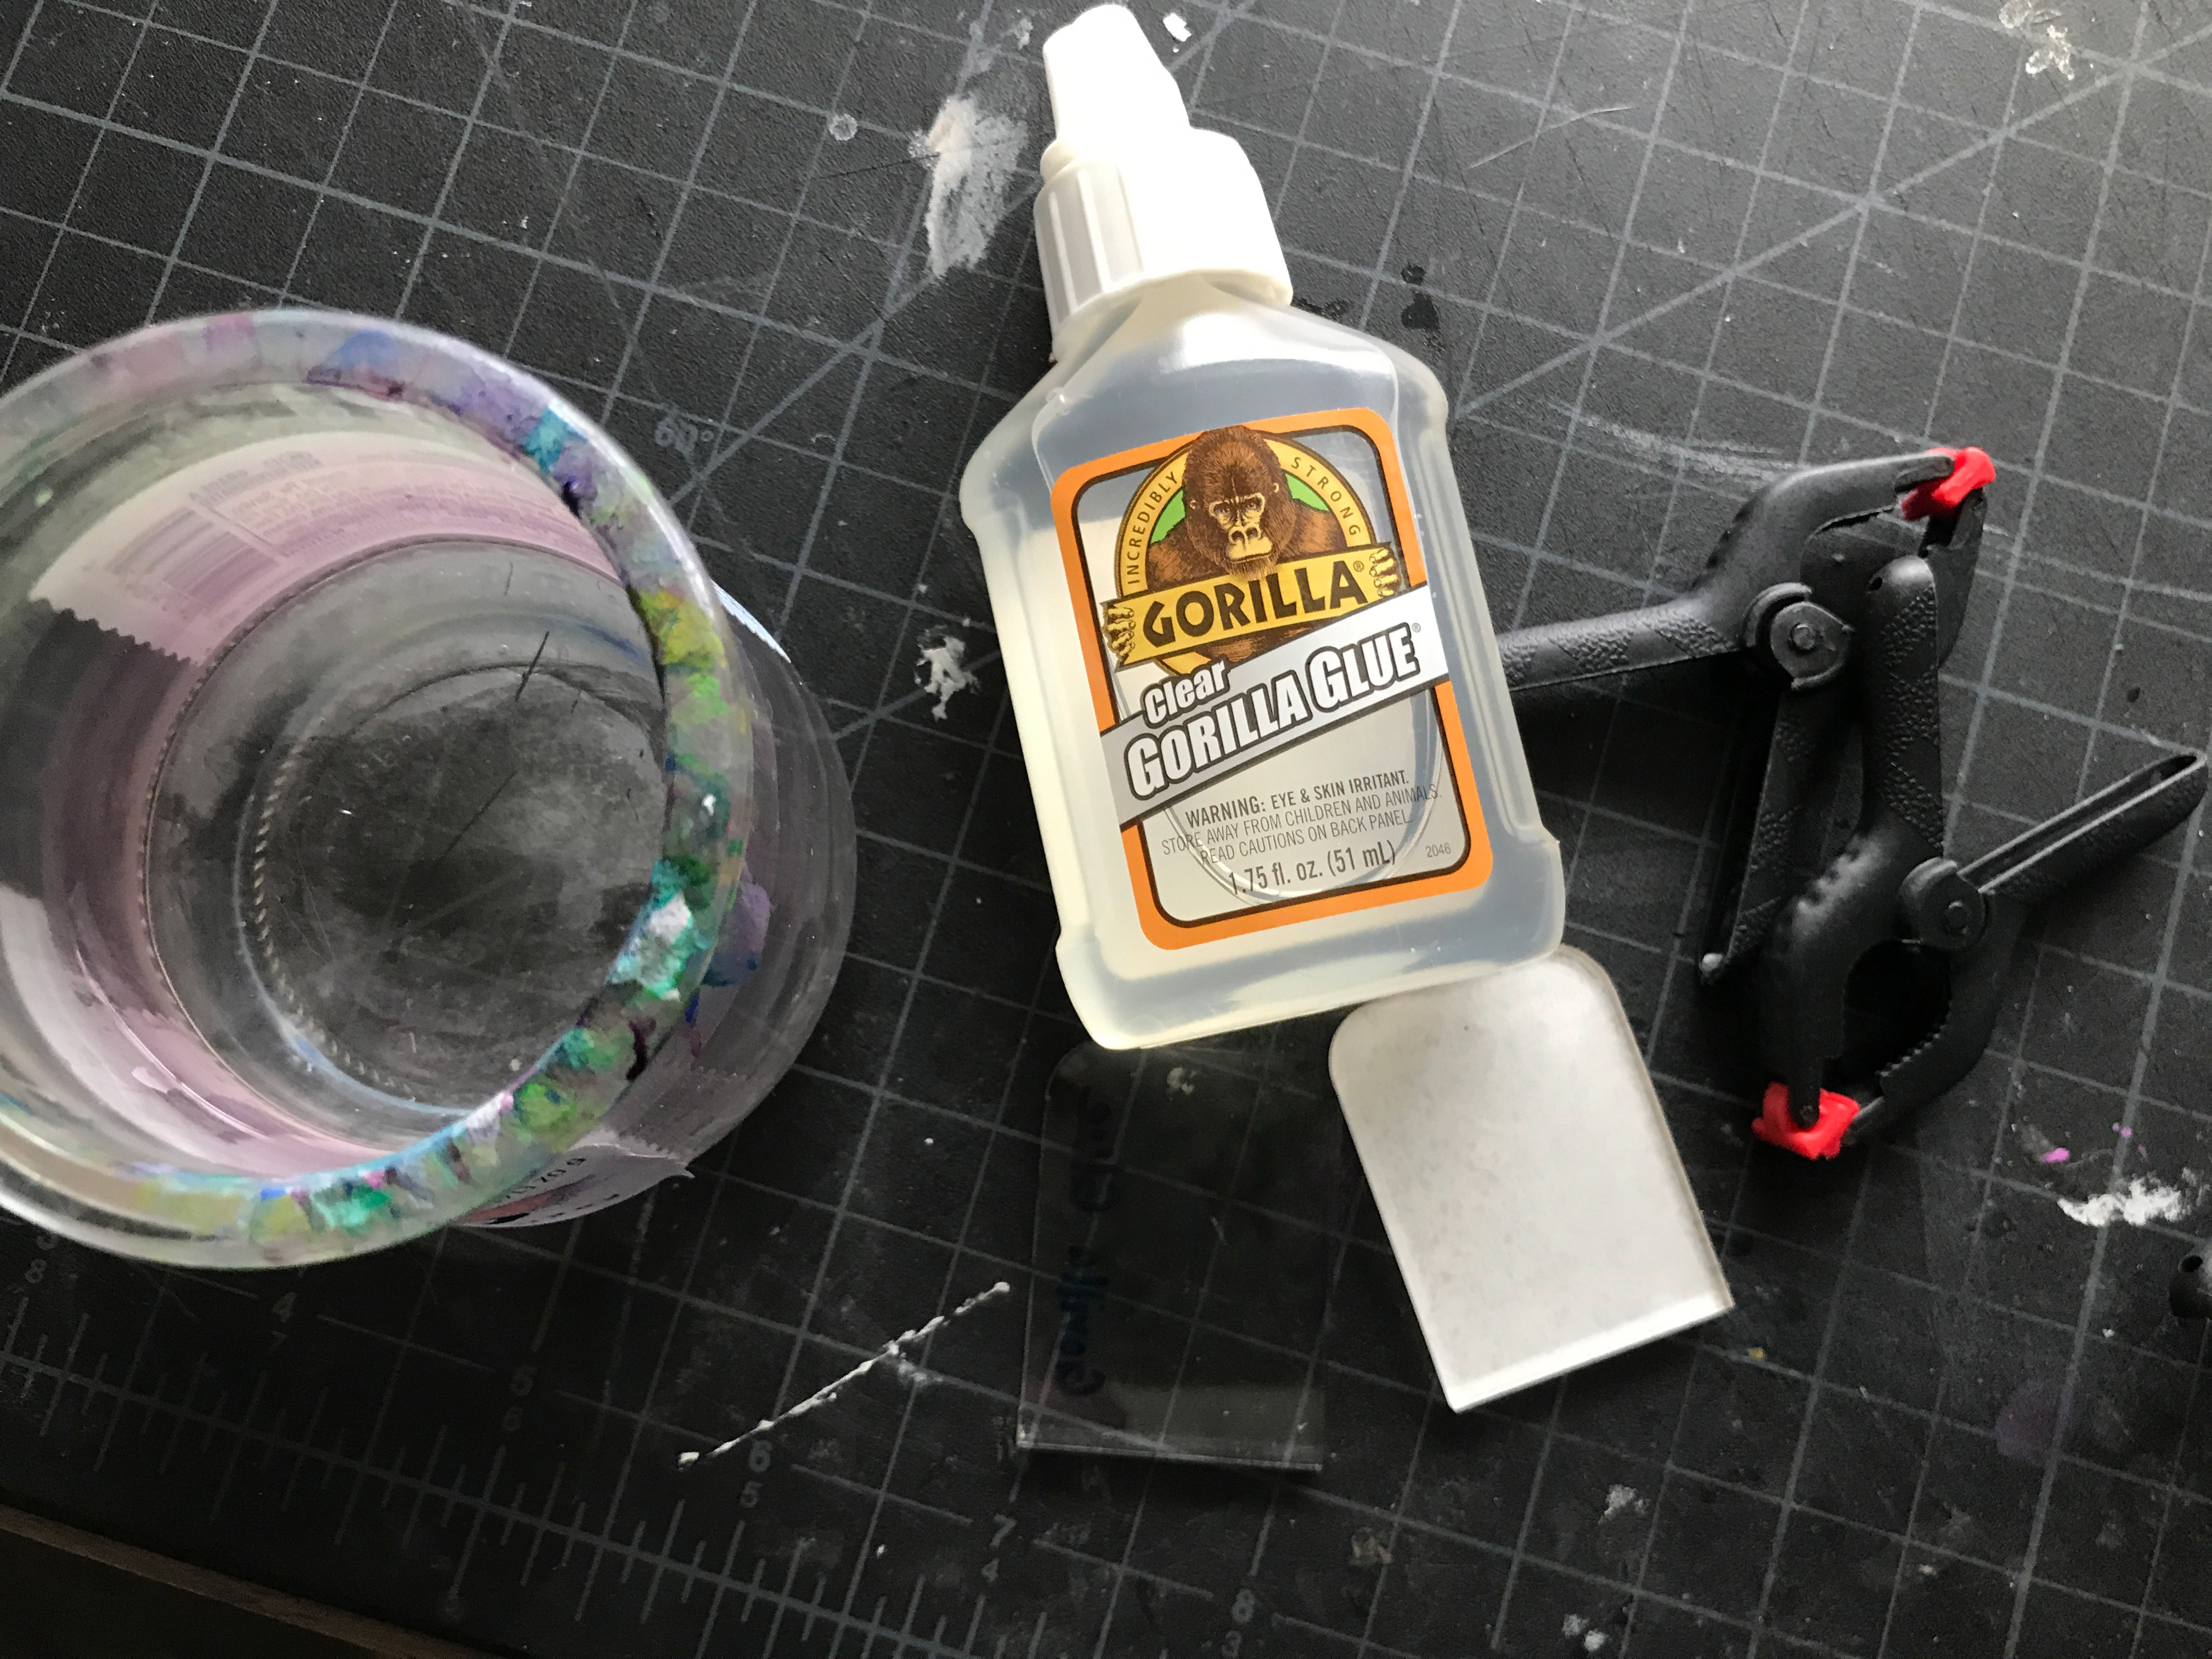 How to glue leather and skin - Contact glue and white glue without solvents  